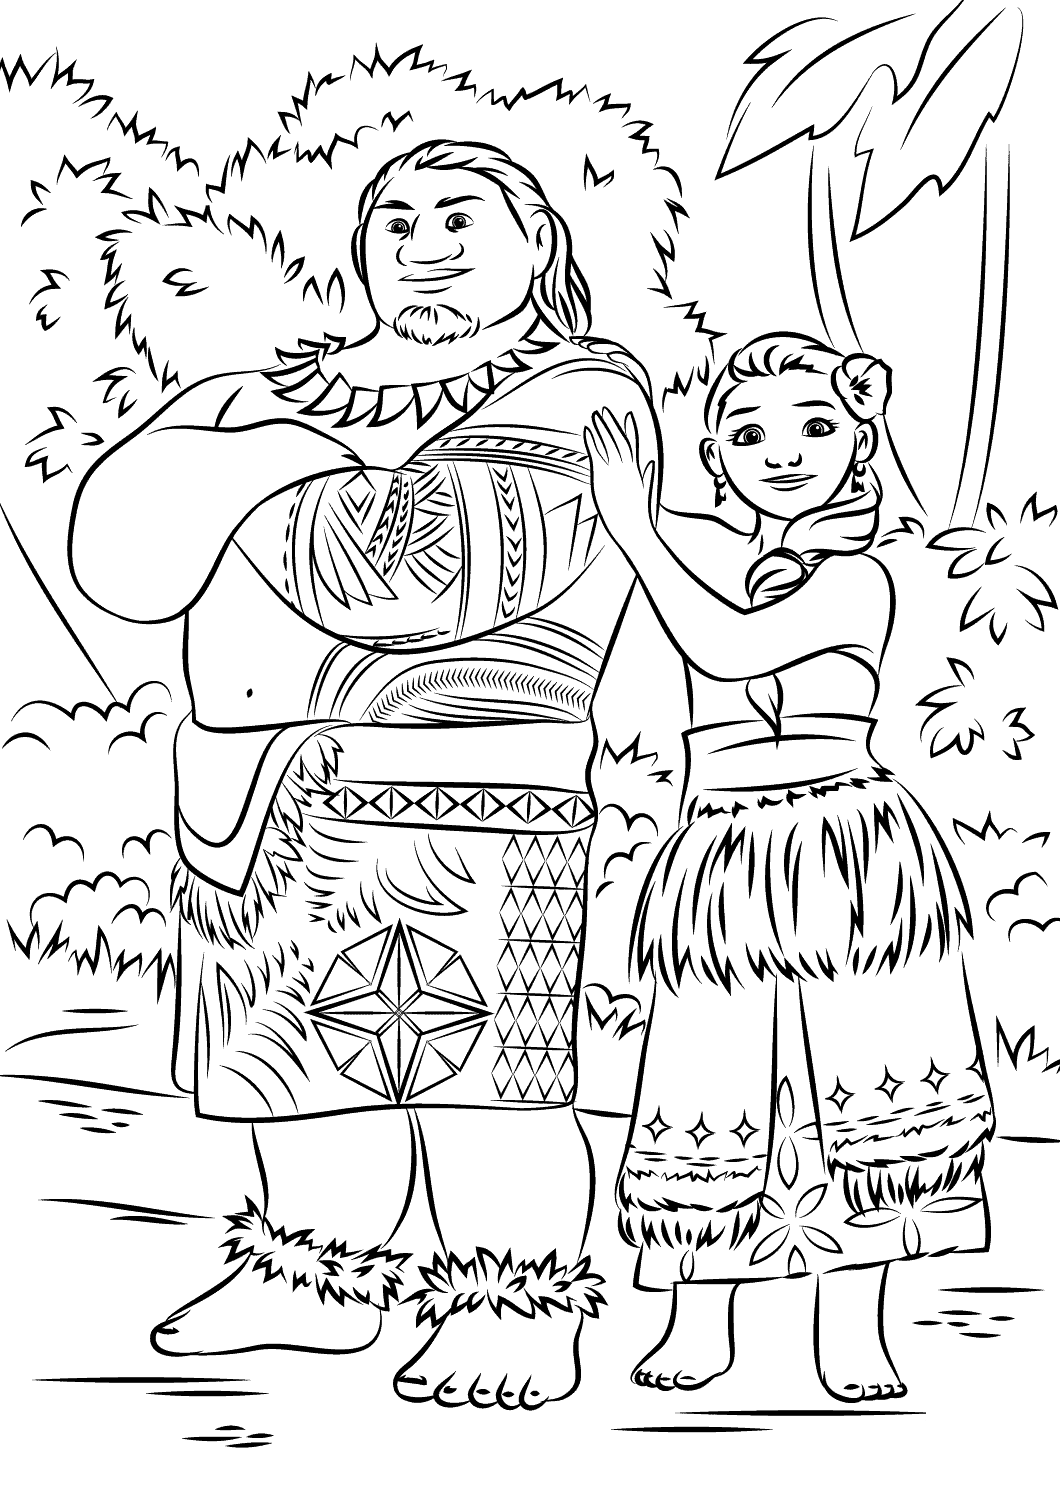 Click to see printable version of Tui y Sina Coloring page